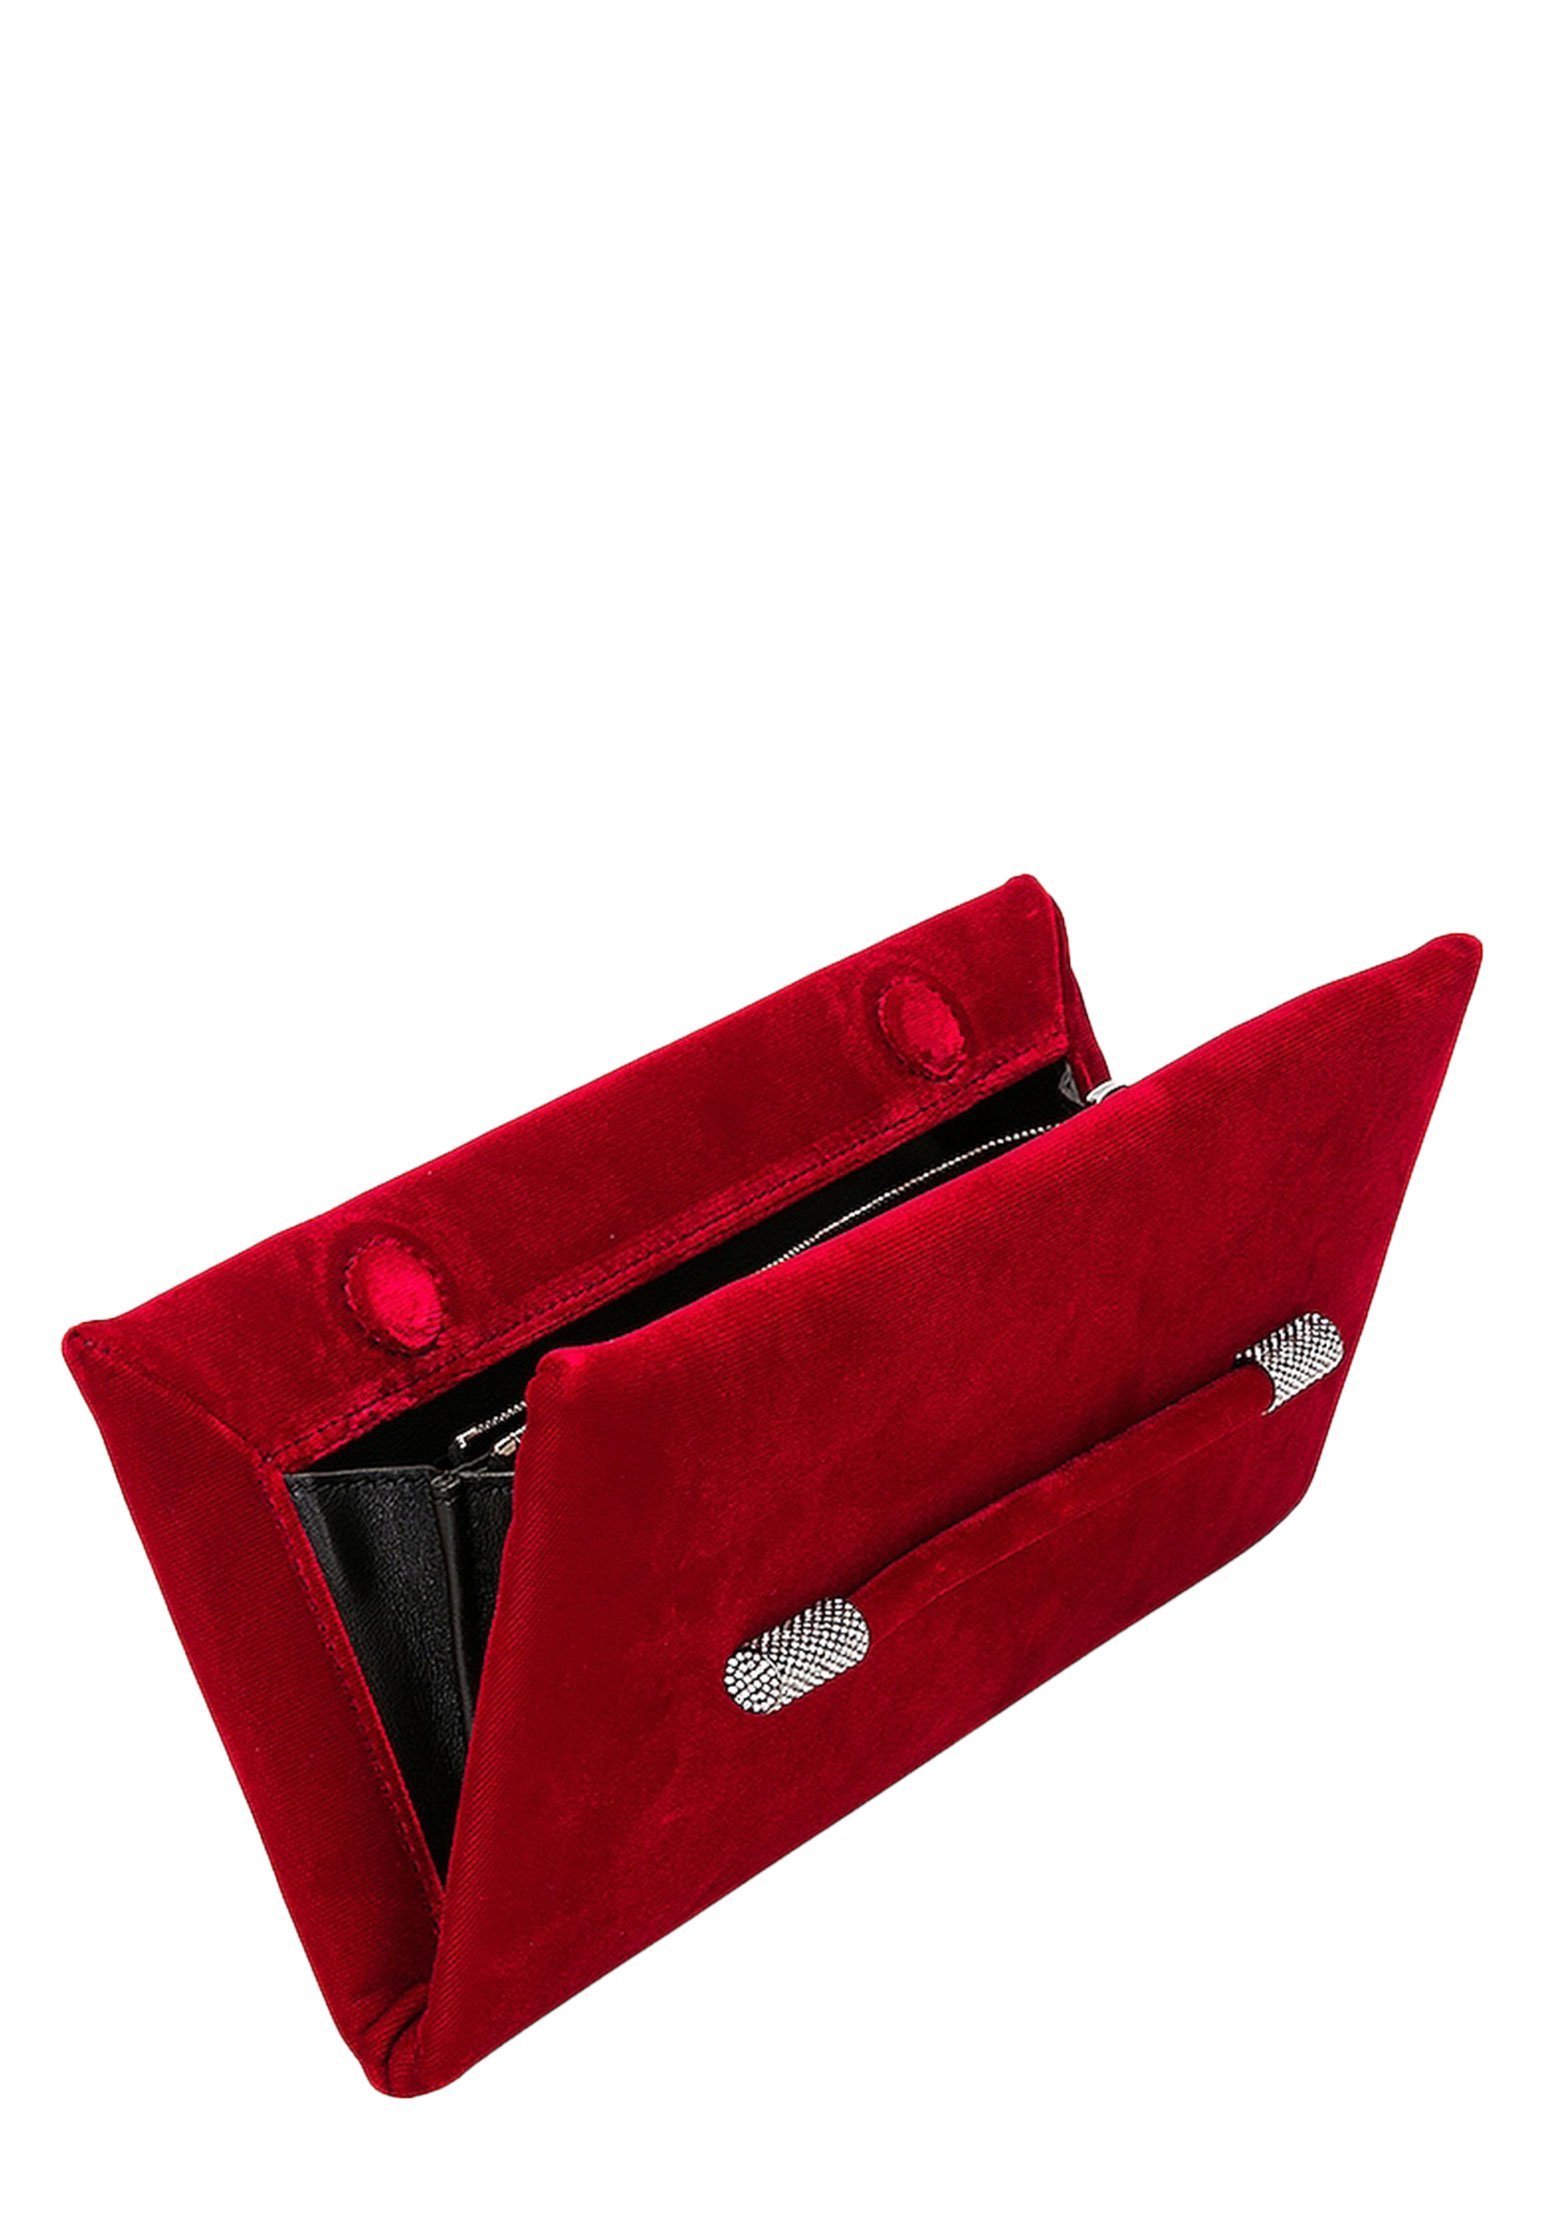 Bag TOM FORD Color: red (Code: 2953) in online store Allure